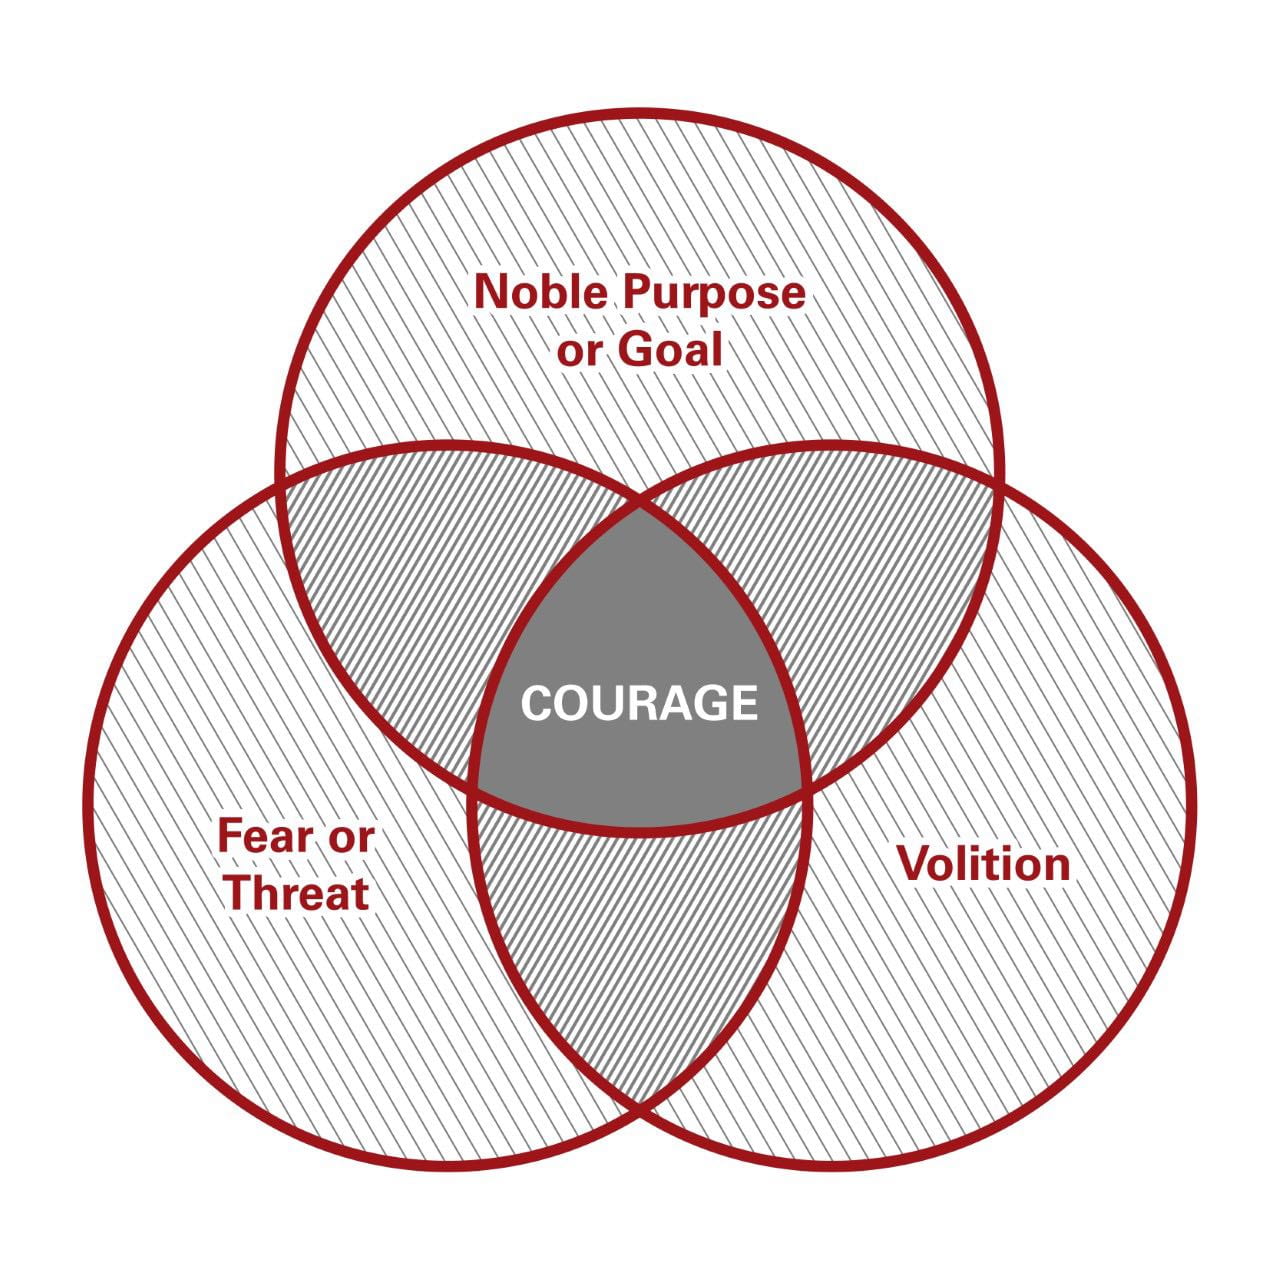 About Courage – Unlock Your Courage